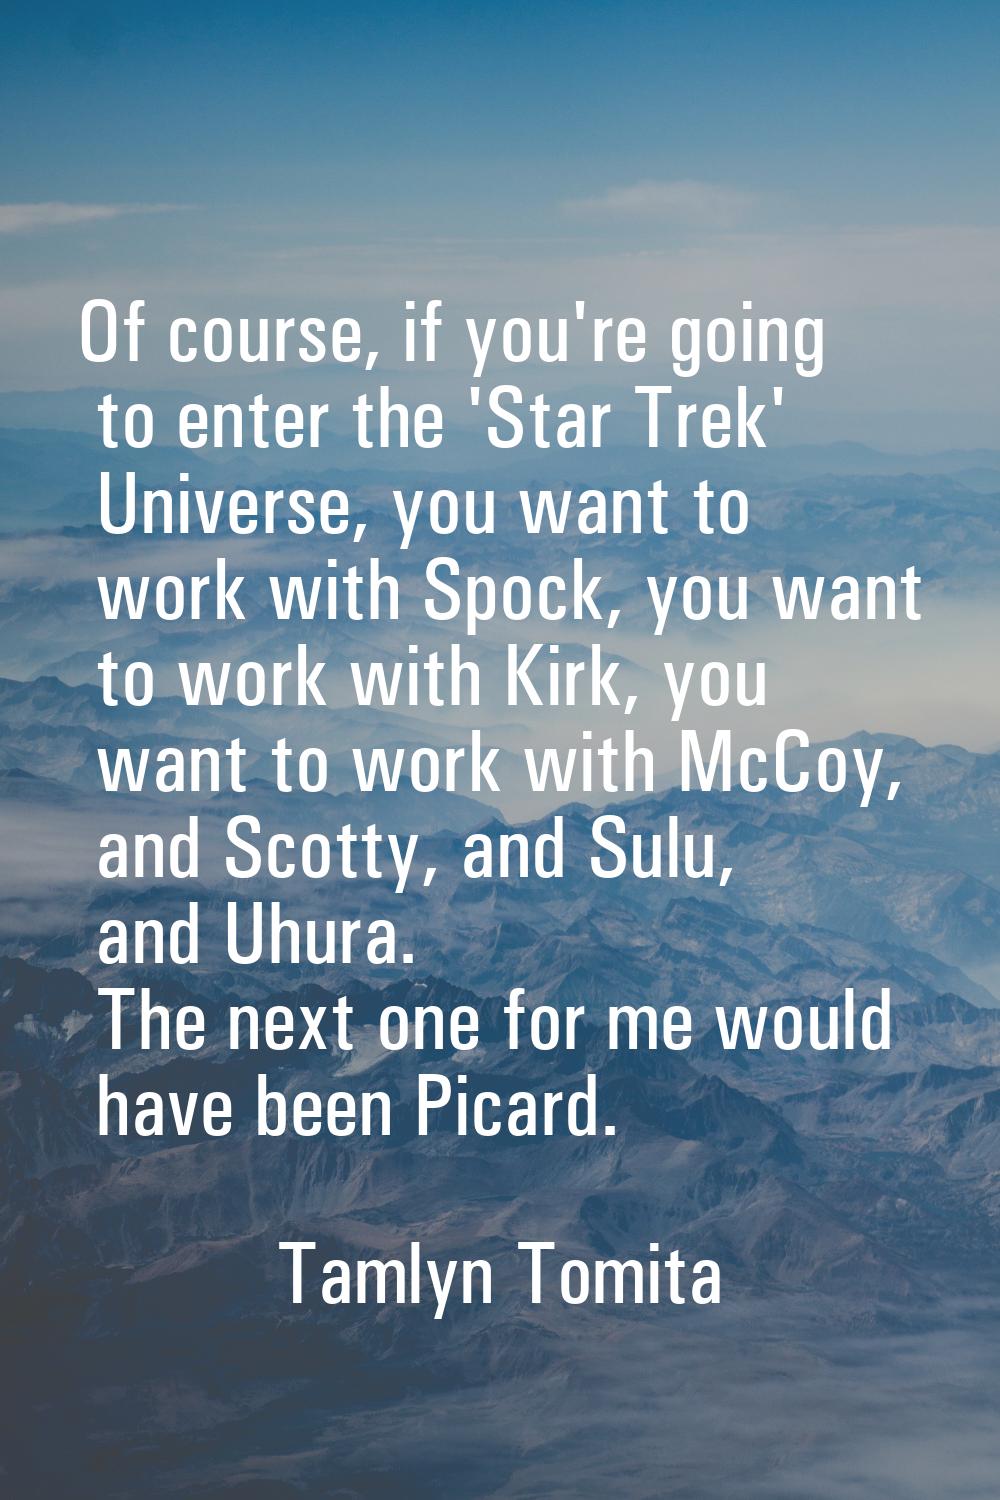 Of course, if you're going to enter the 'Star Trek' Universe, you want to work with Spock, you want